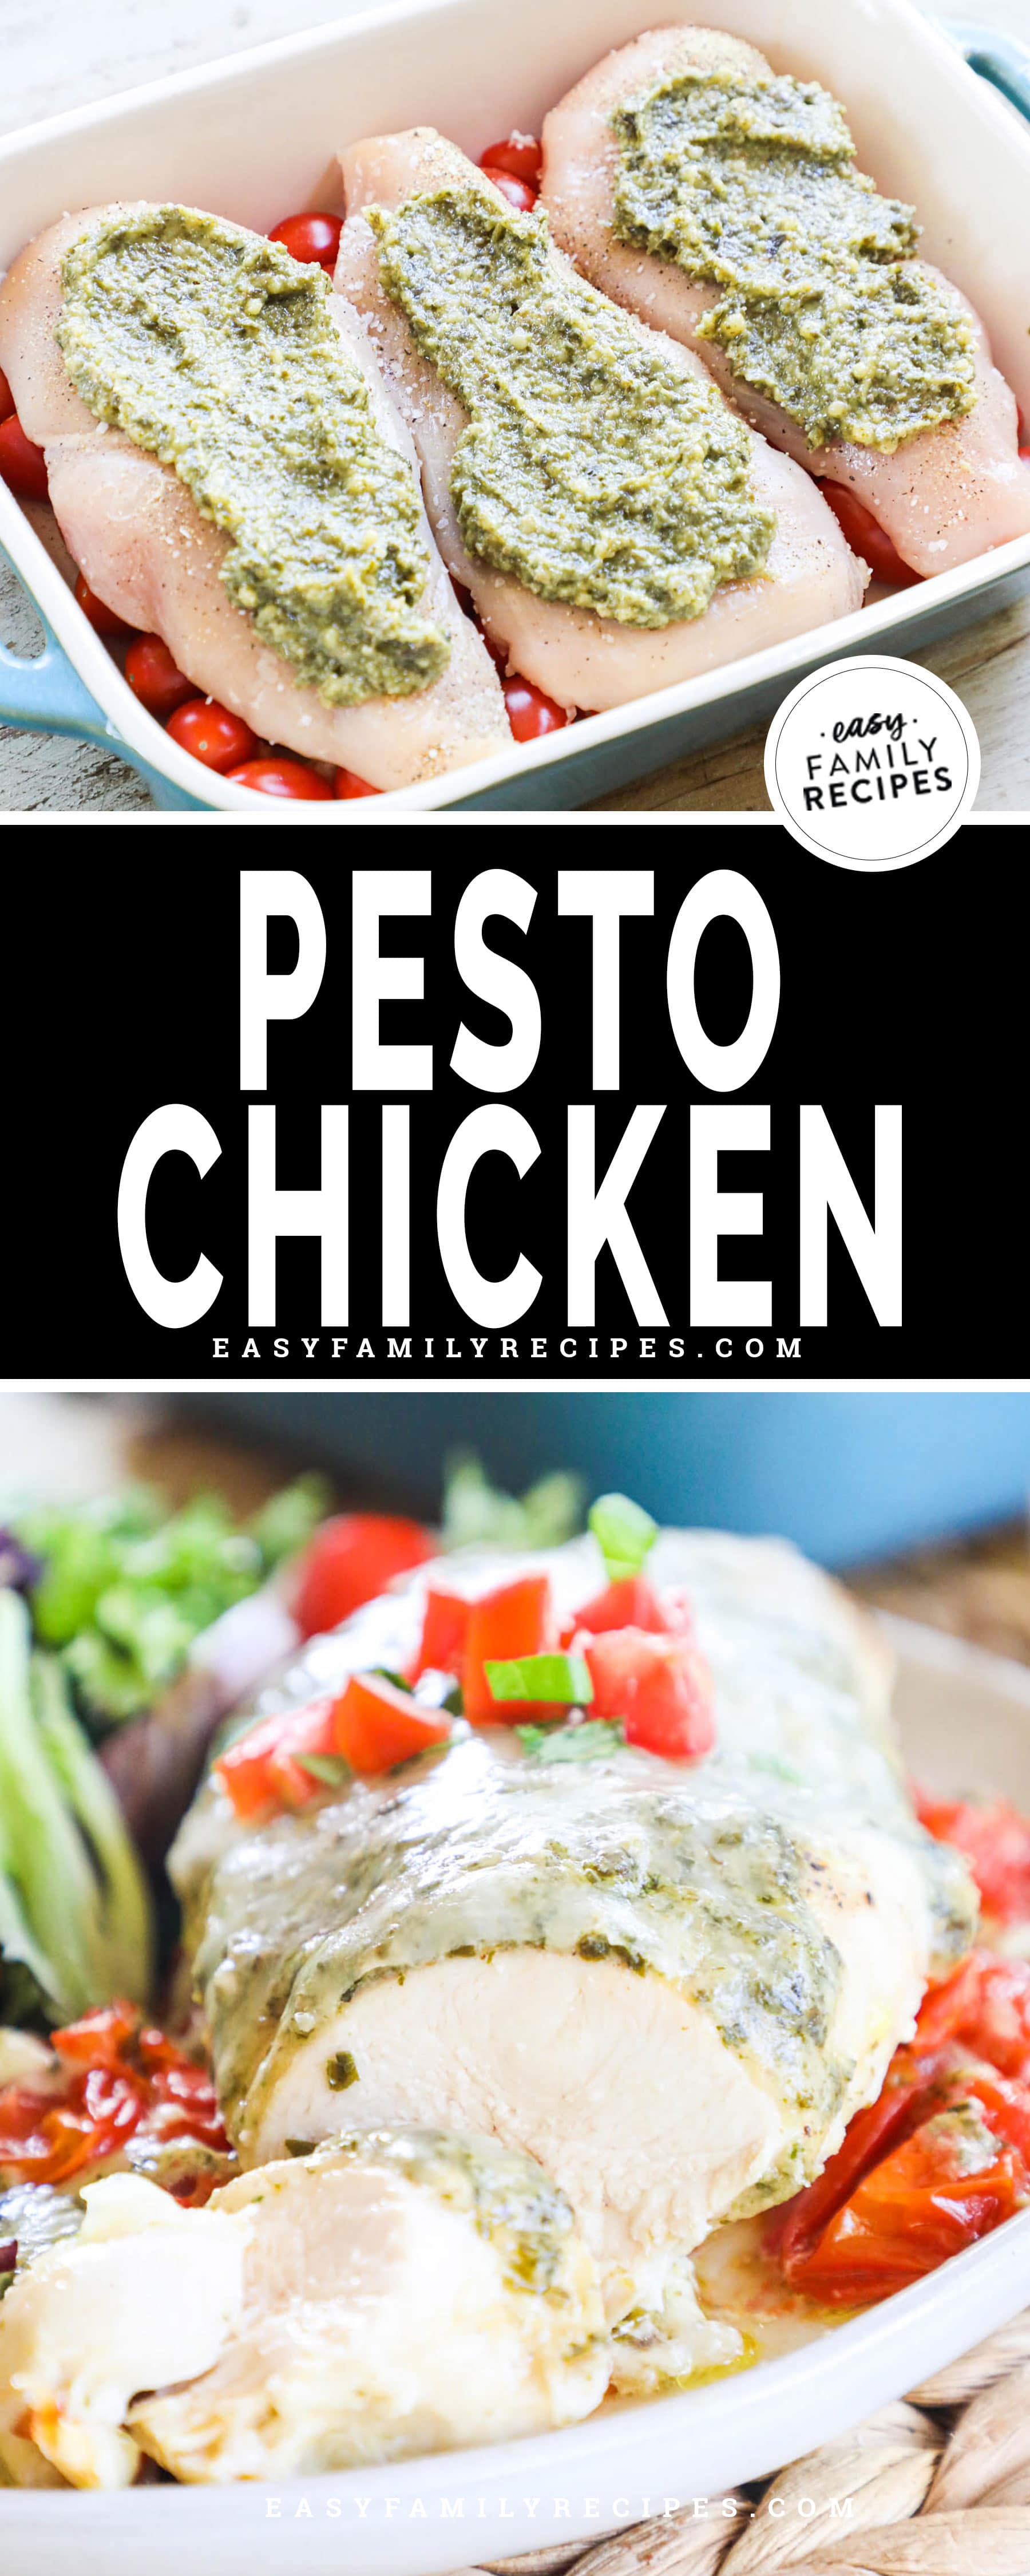 pesto and mozzarella topped baked chicken breasts on top of fresh cherry tomato sauce